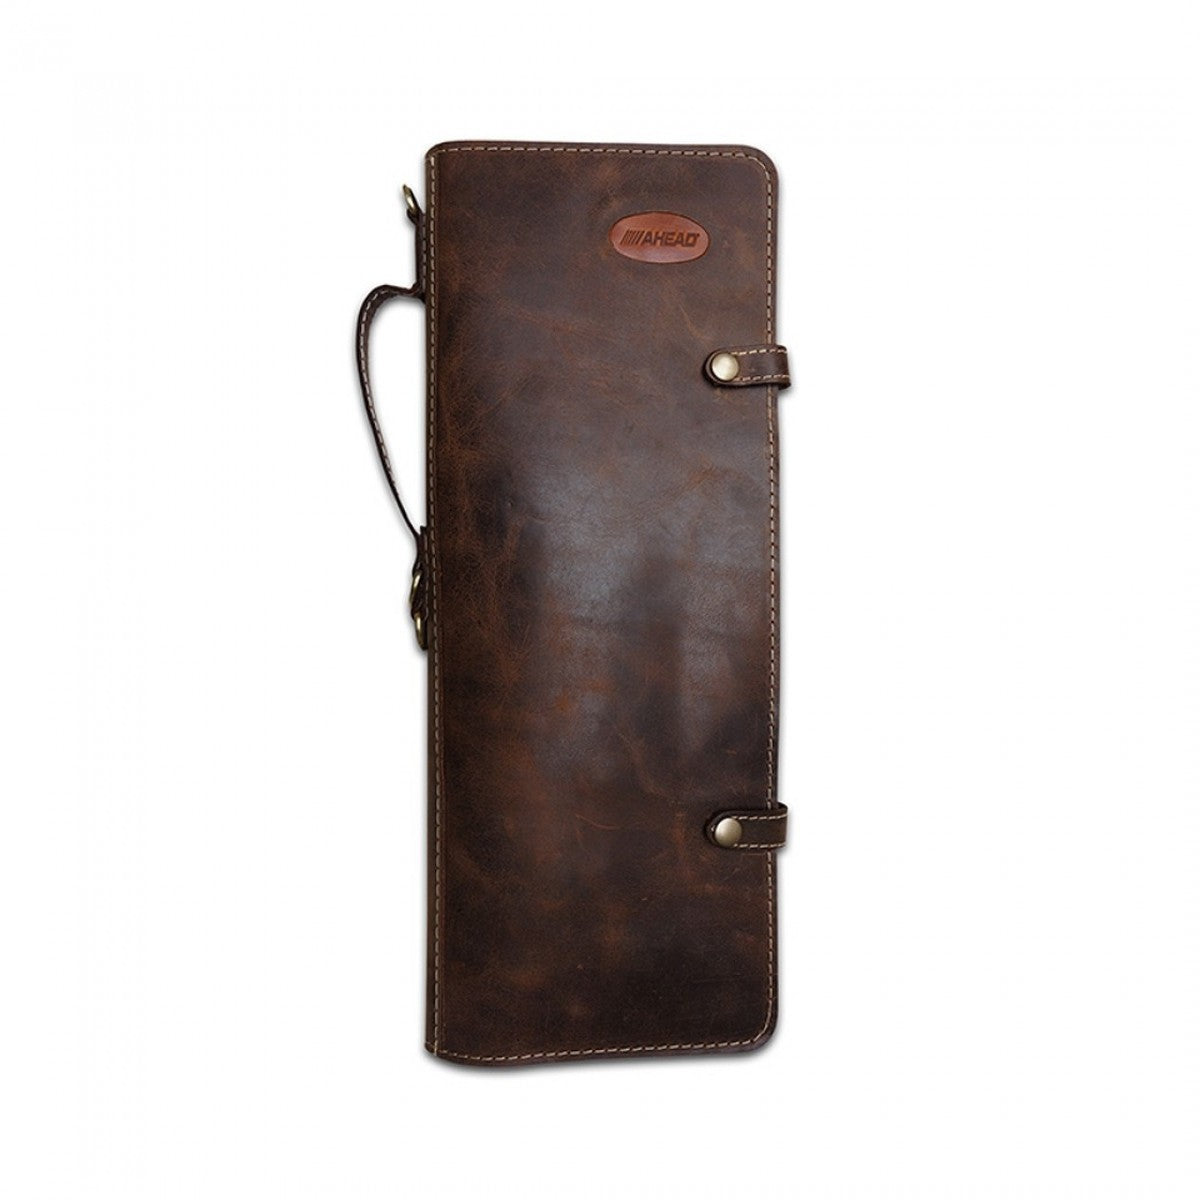 Ahead Handmade Leather Stick Bag in Brown